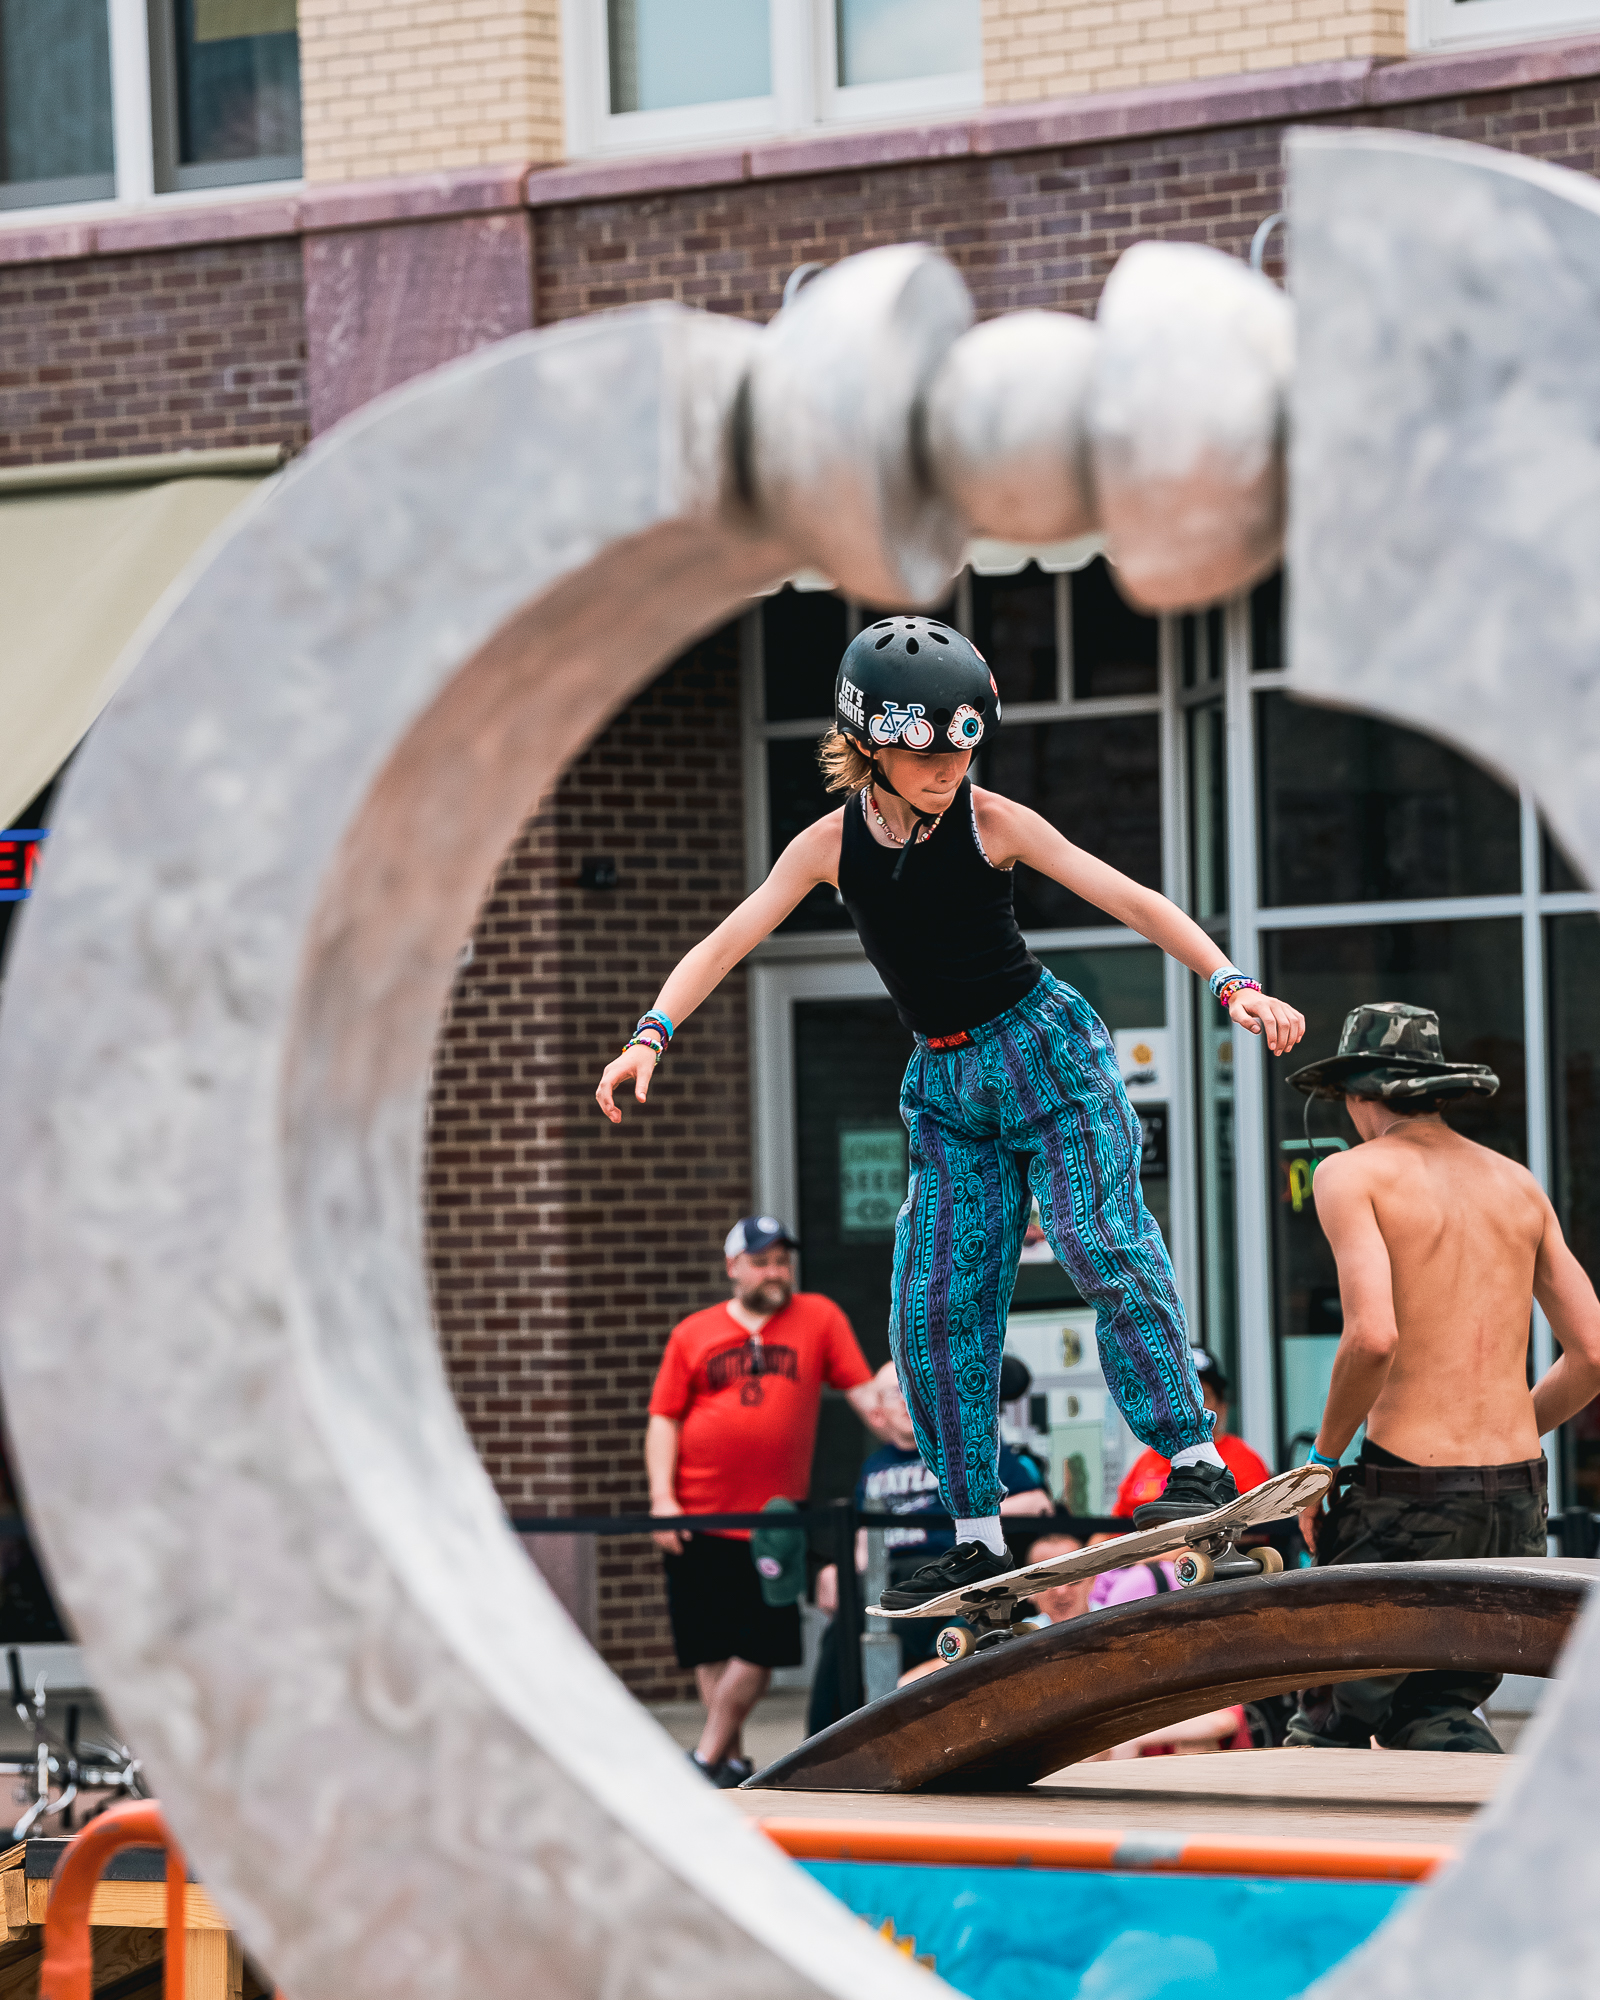 A young skateboarder balances on their board on top of a mini ramp during Innoskate 2022 in Sioux Falls, SD.